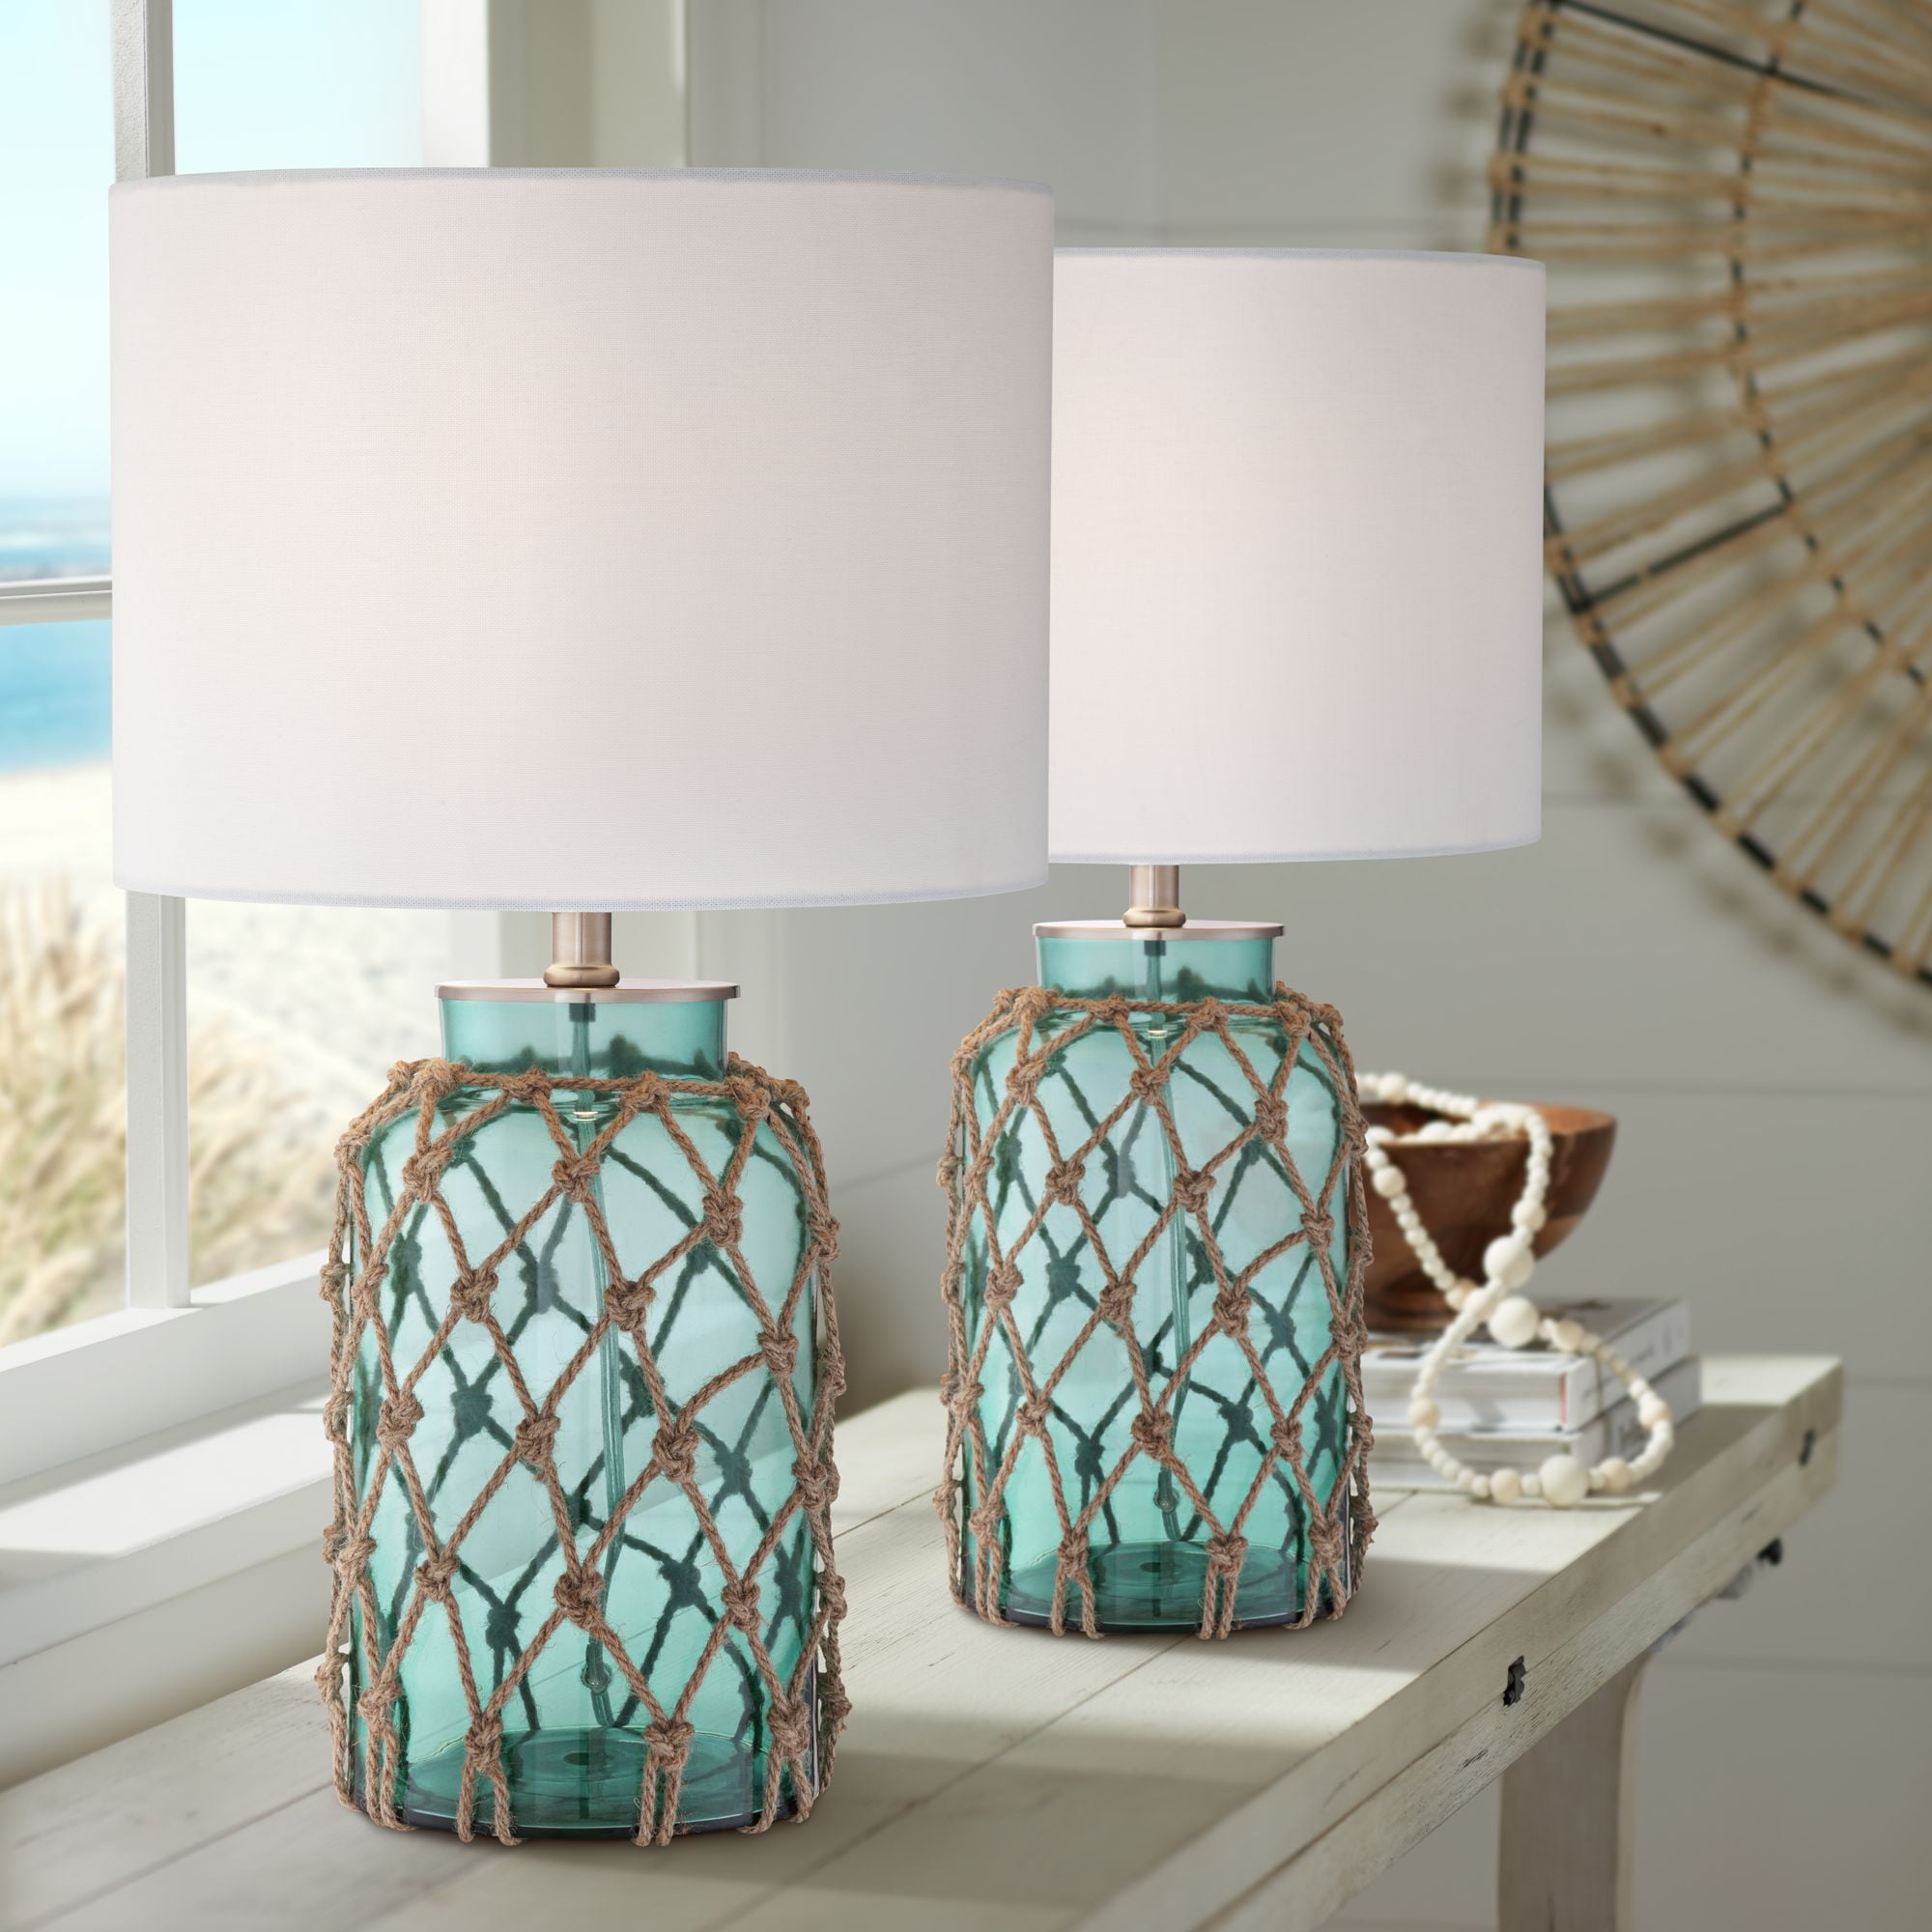 360 Lighting Nautical Accent Table, Light Green Table Lamp Shade